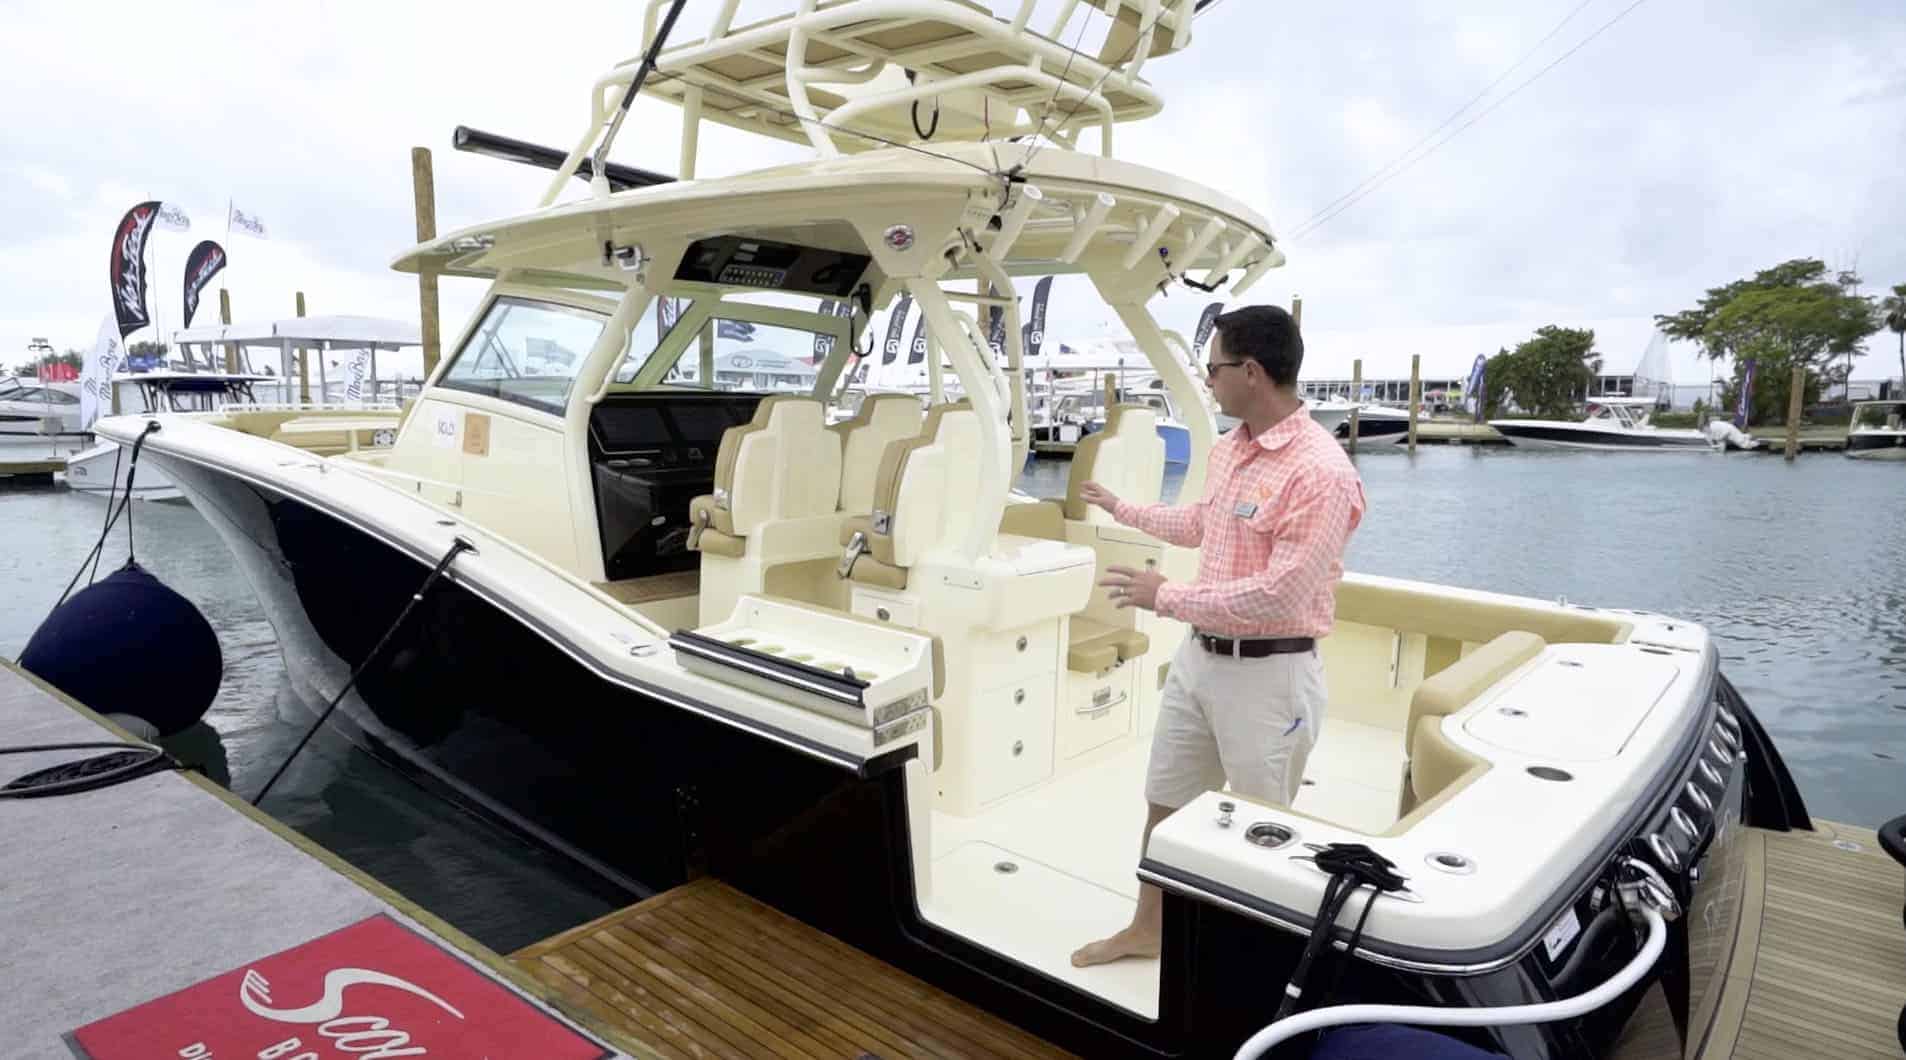 Luxury Boat Brands - What to Look For